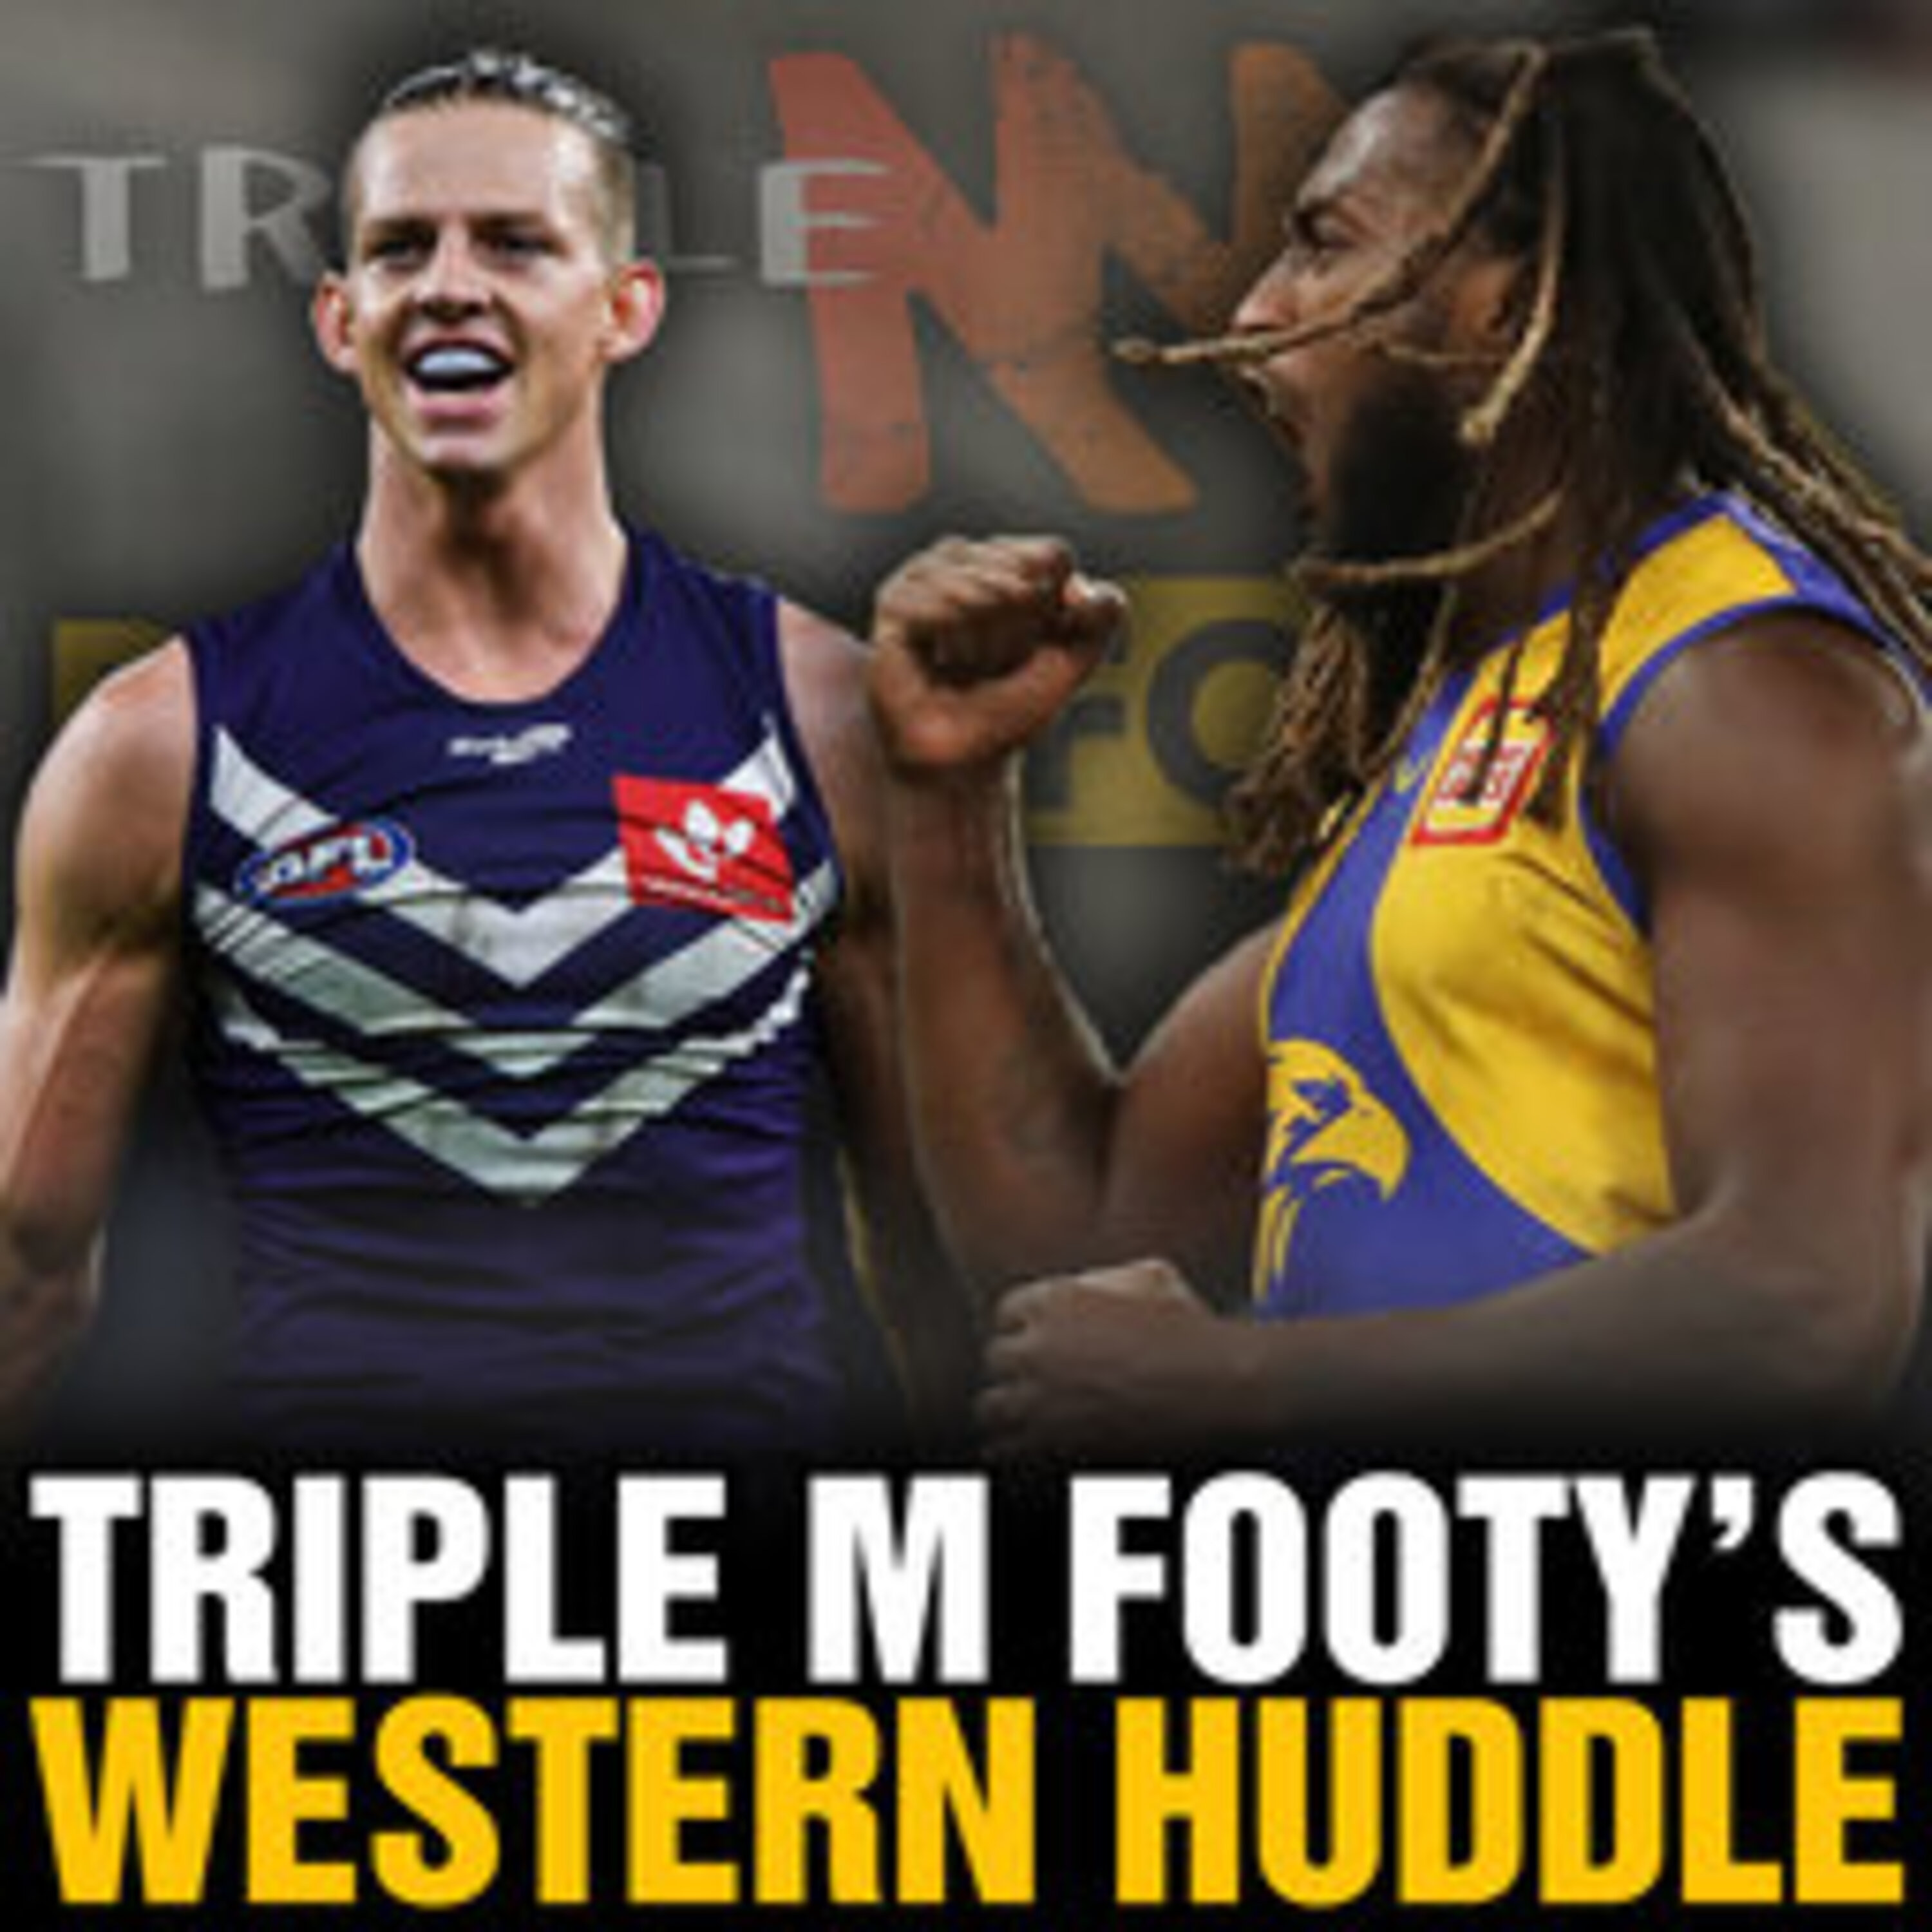 WESTERN HUDDLE | Lock in Nat Fyfe to win the Coleman, WA fans used to be scarier, how good will Oscar Allen be?